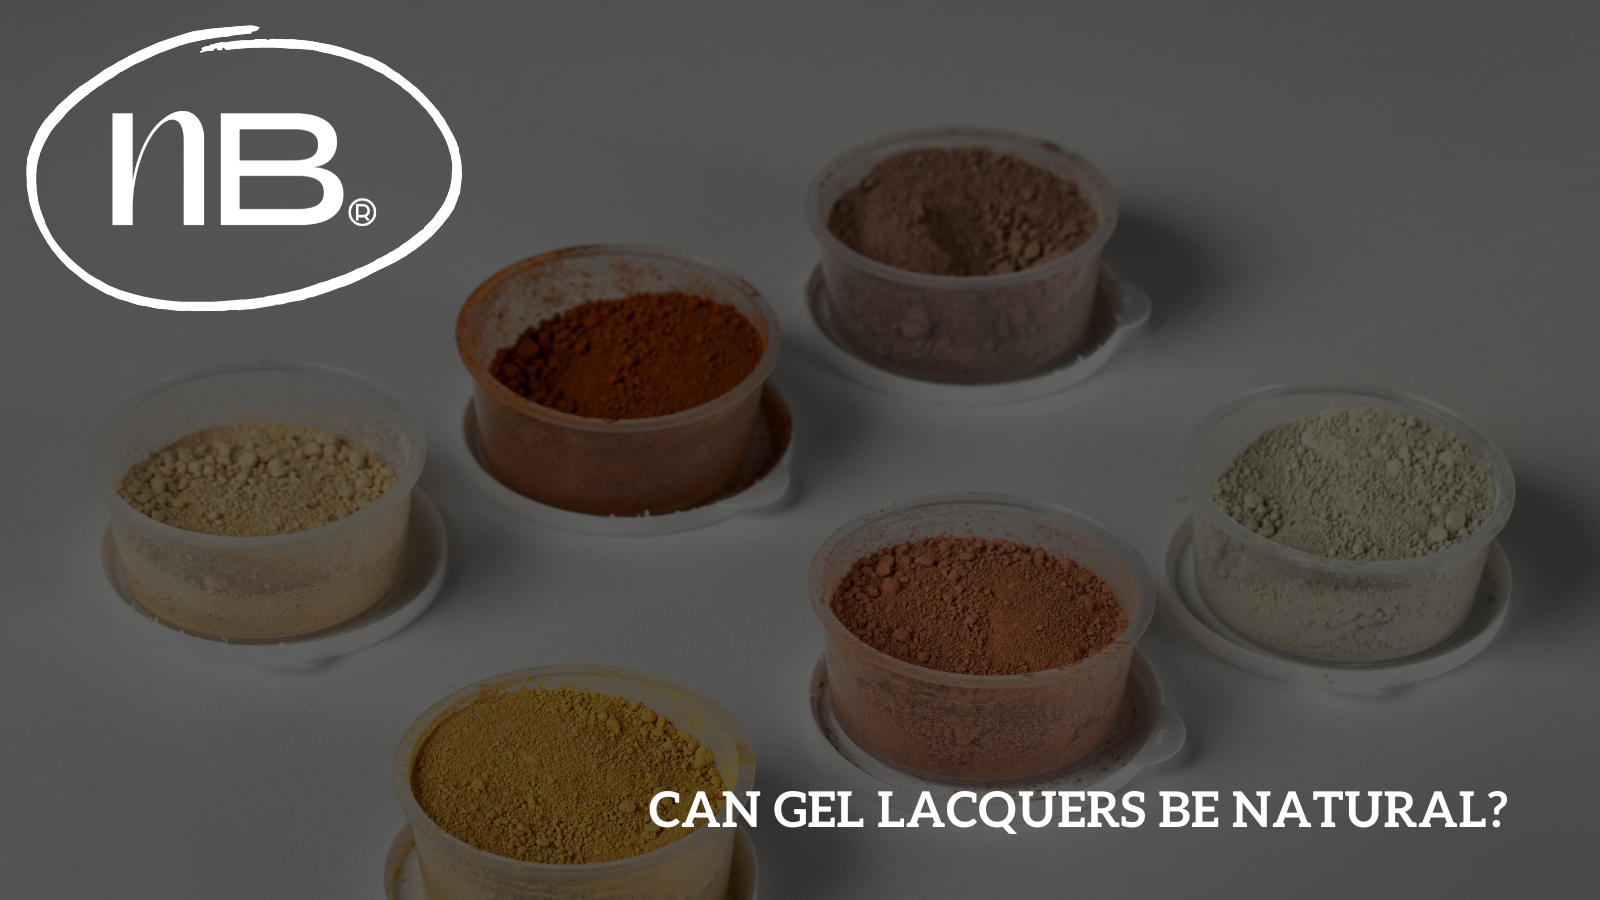 Can gel lacquers be natural?